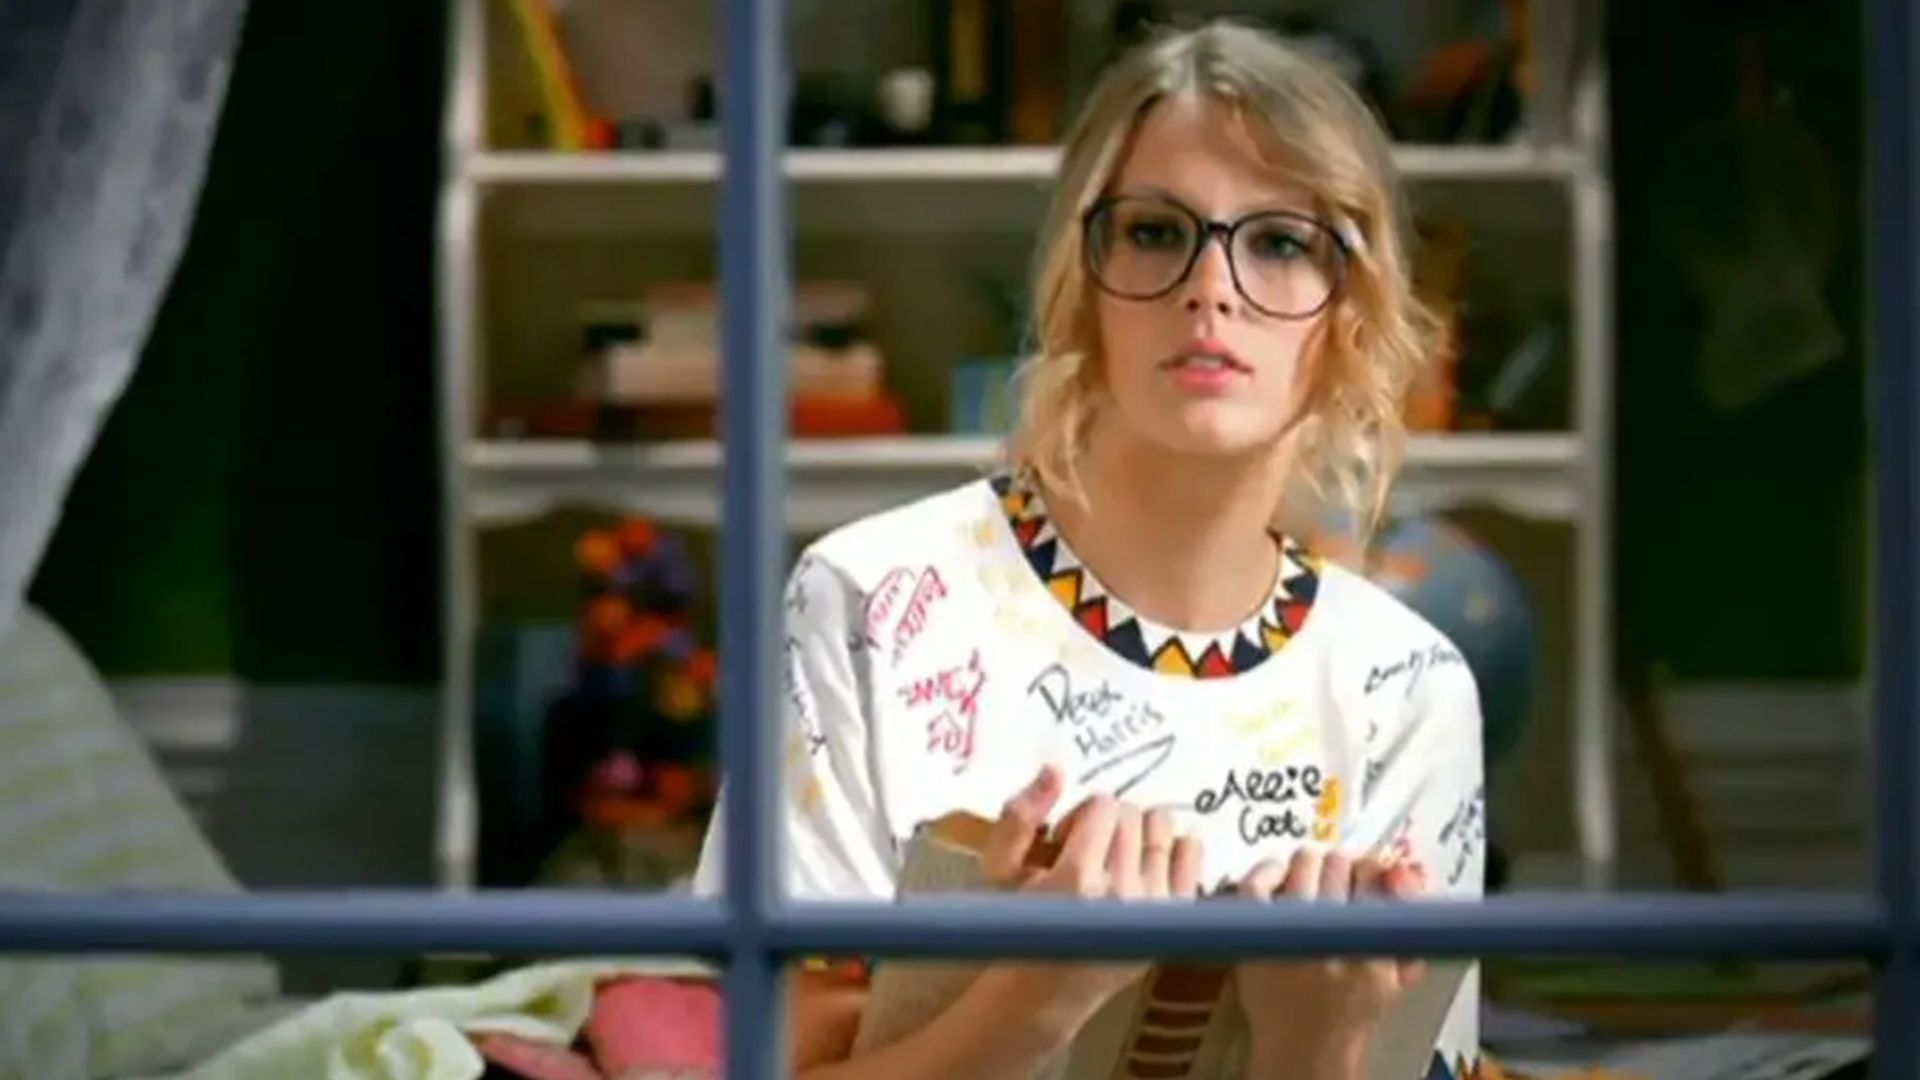 Taylor in You Belong With Me